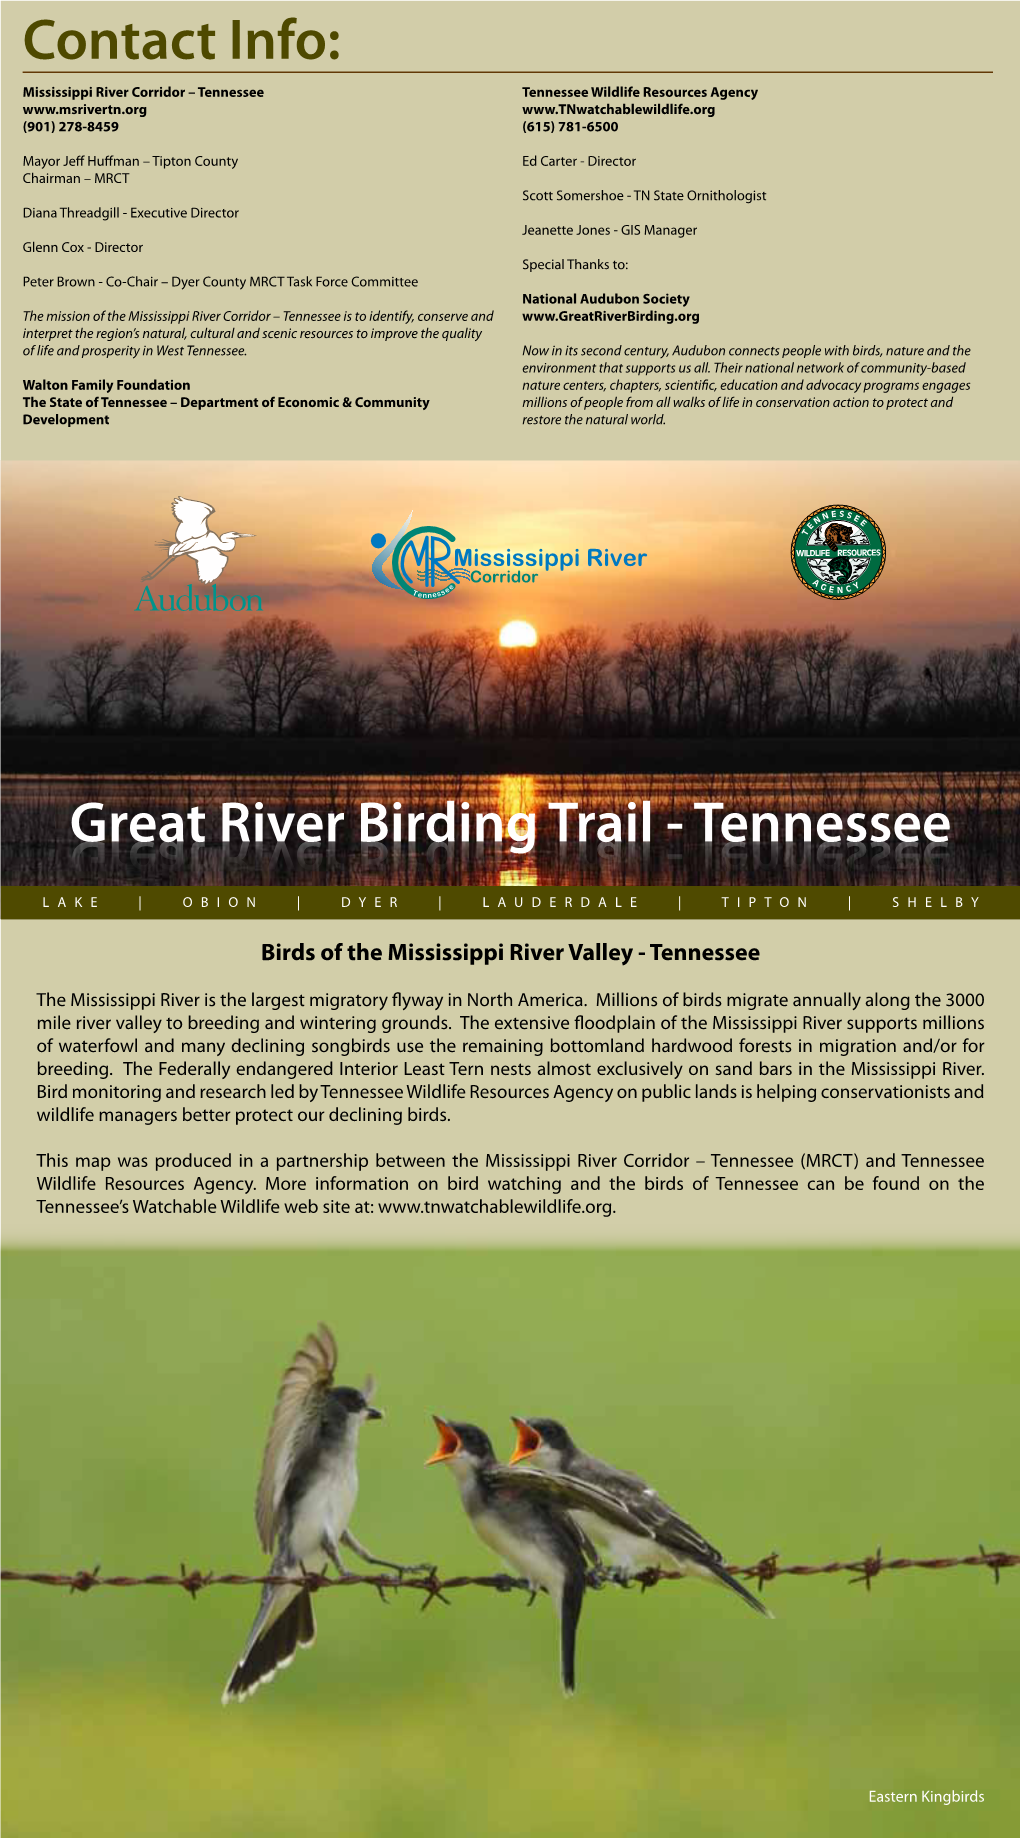 Great River Birding Trail - Tennessee